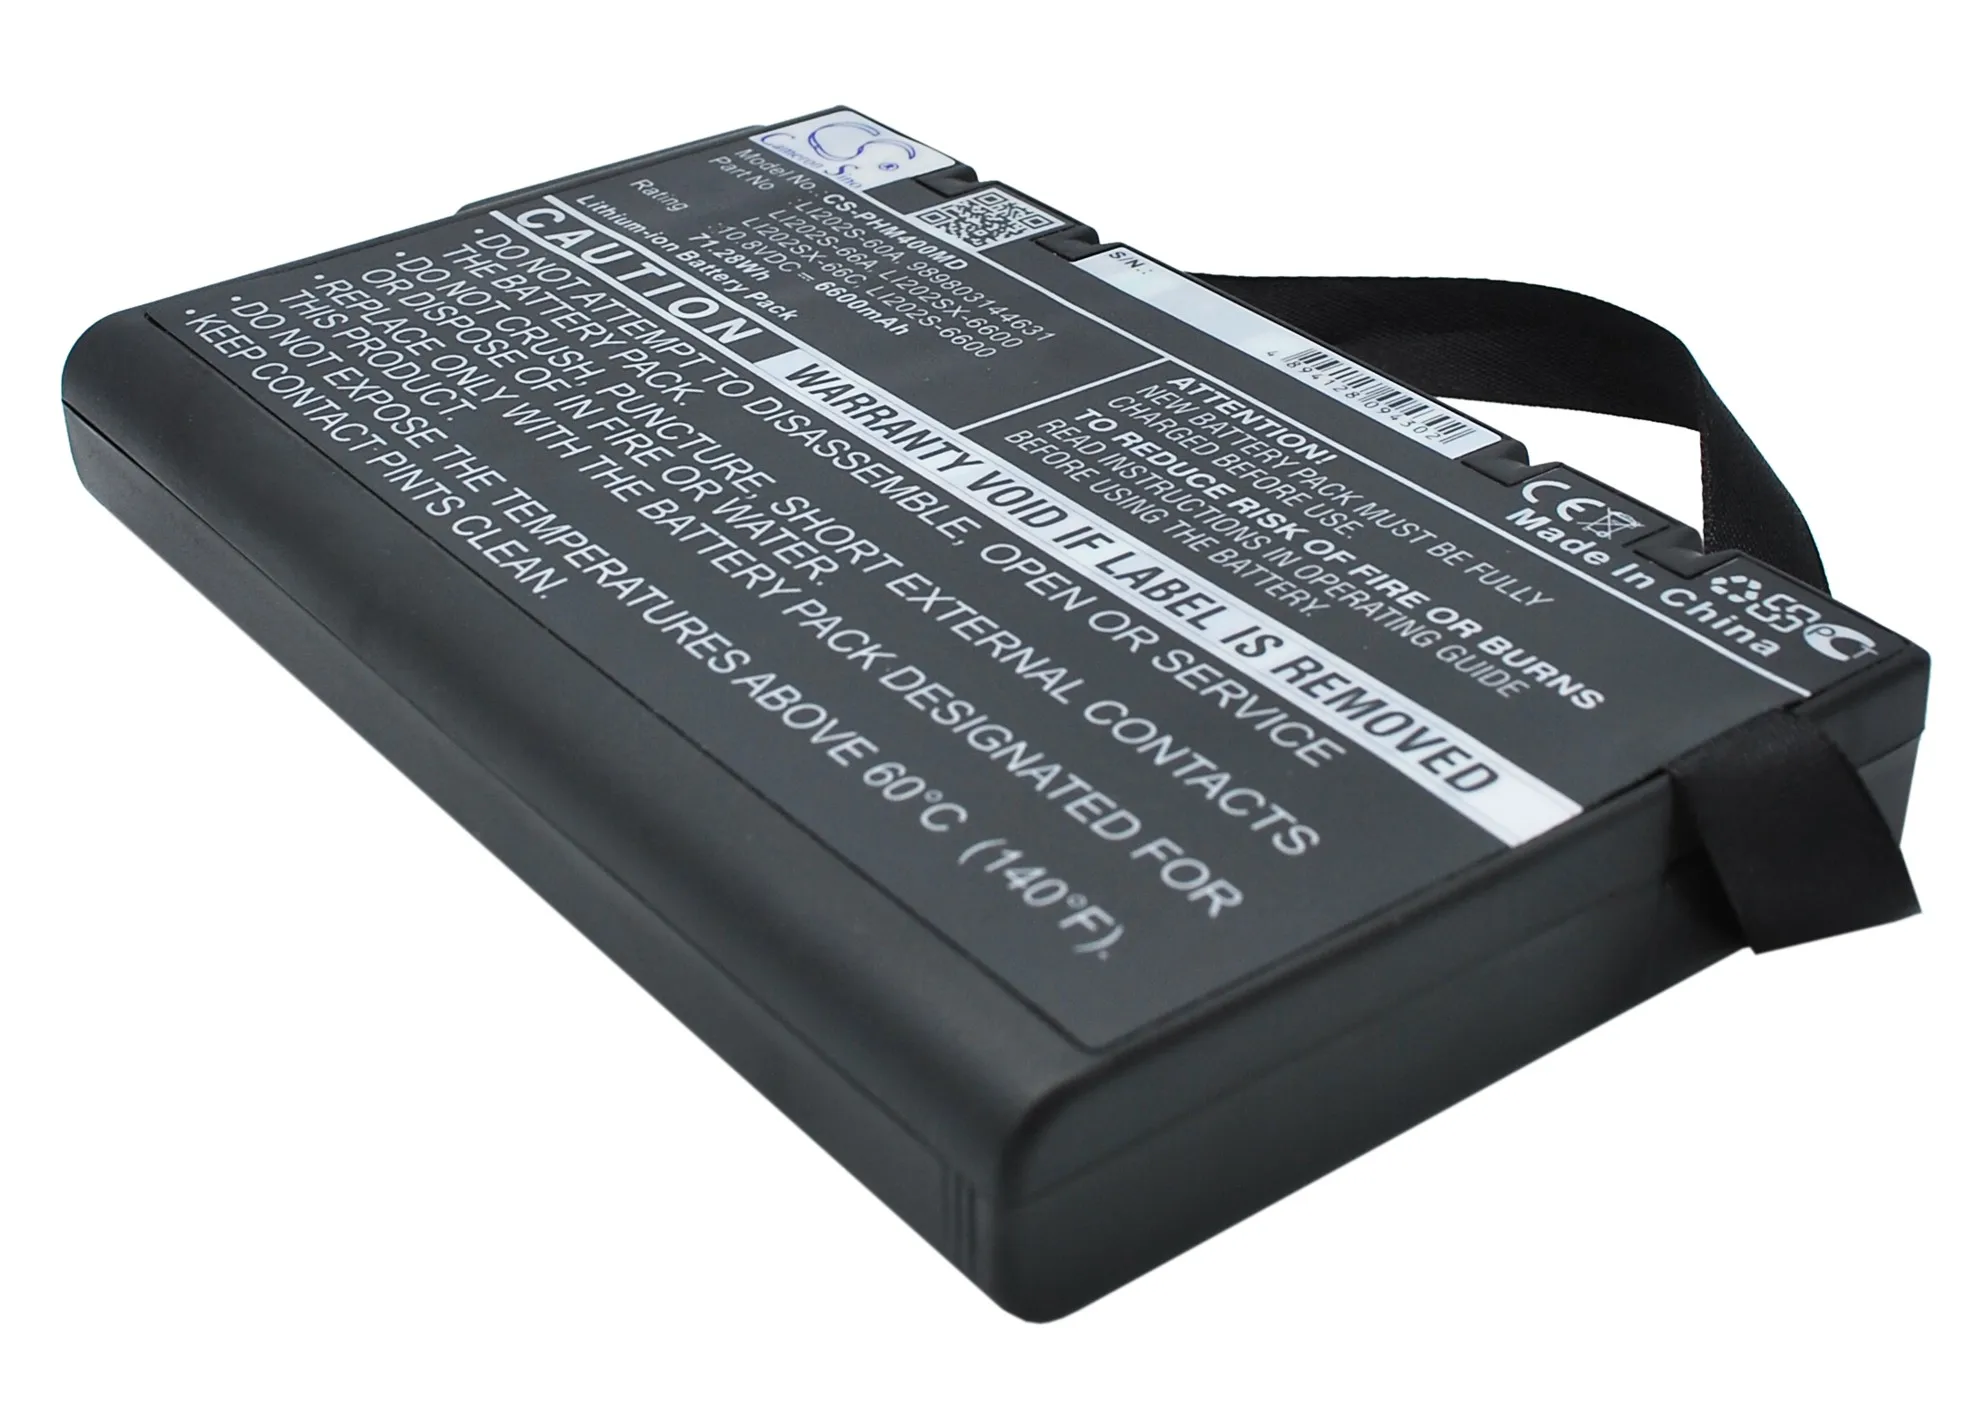 

CS 6600mAh / 71.28Wh battery for Blease Mcare 300, Mcare 300D